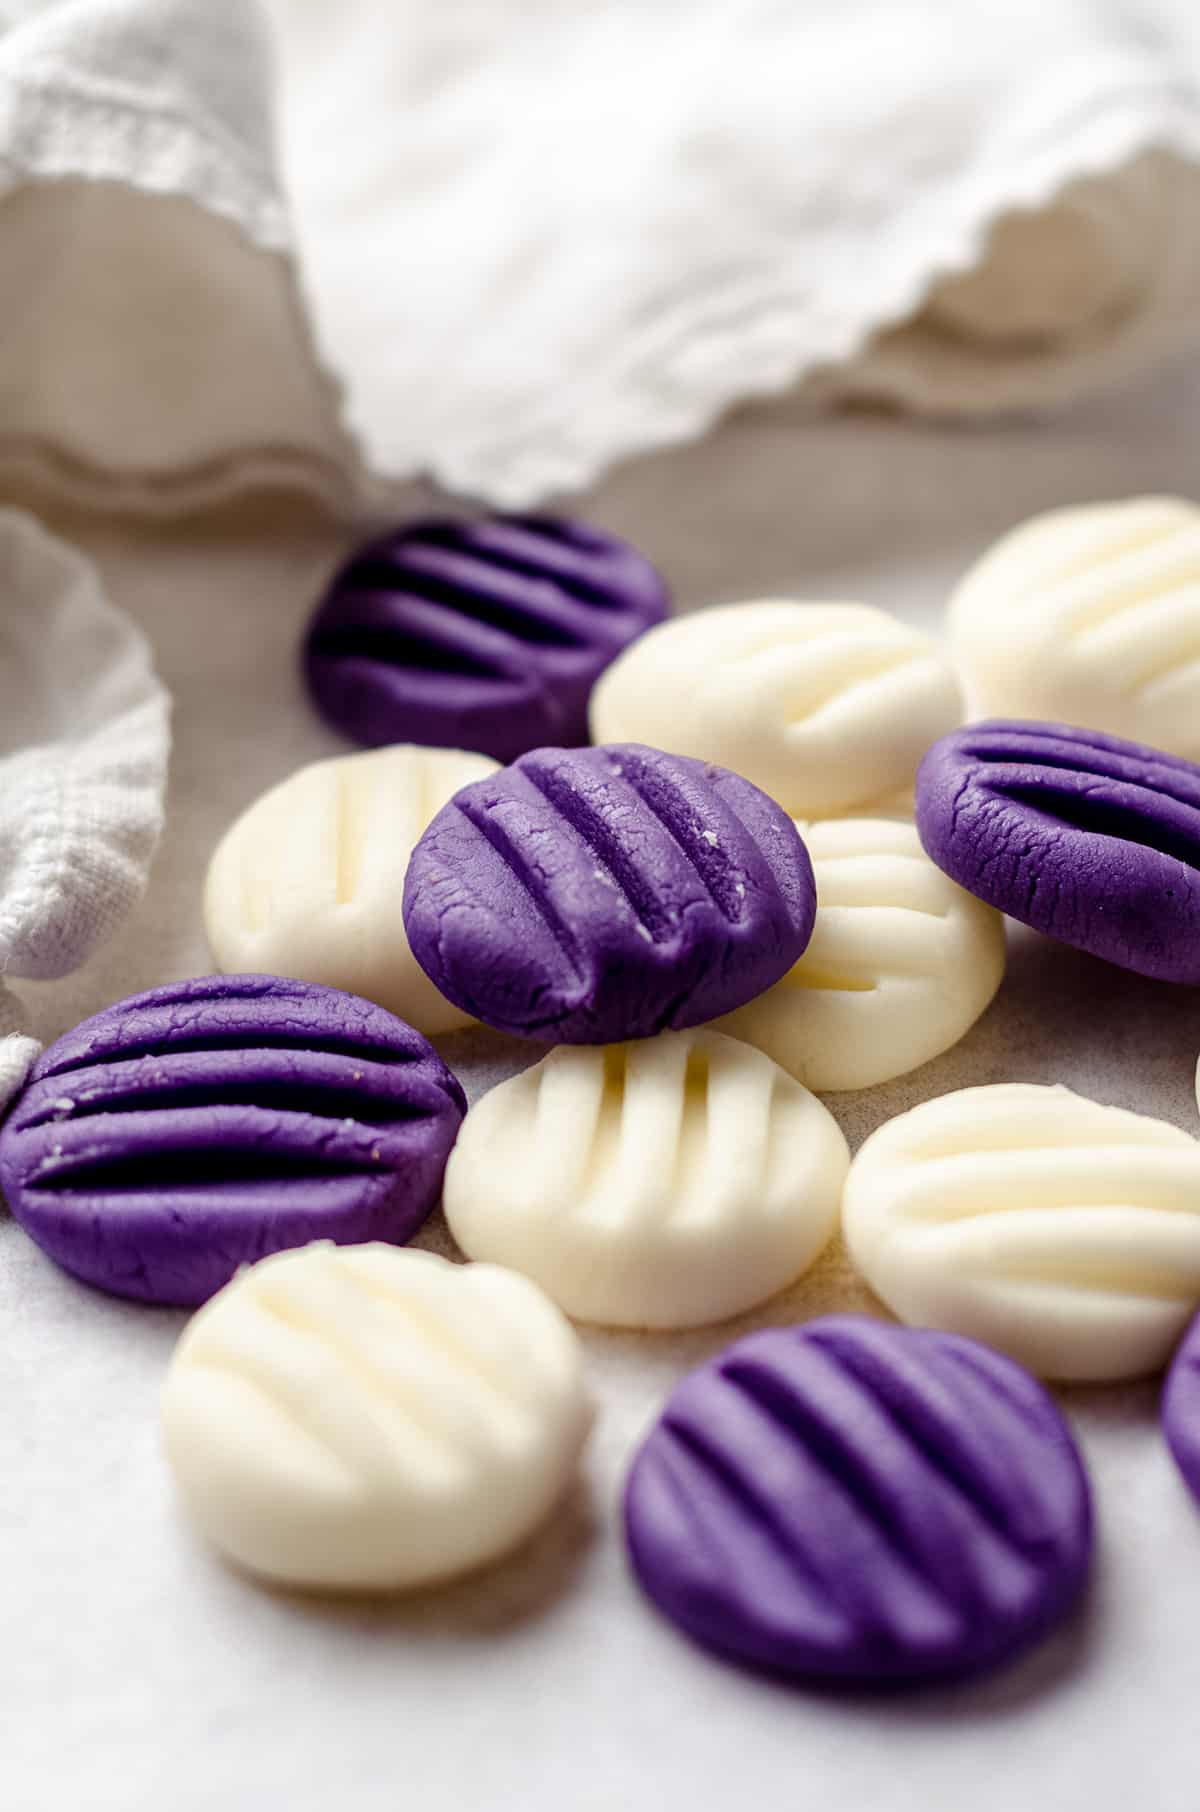 A scattering of purple and white homemade mint candies.